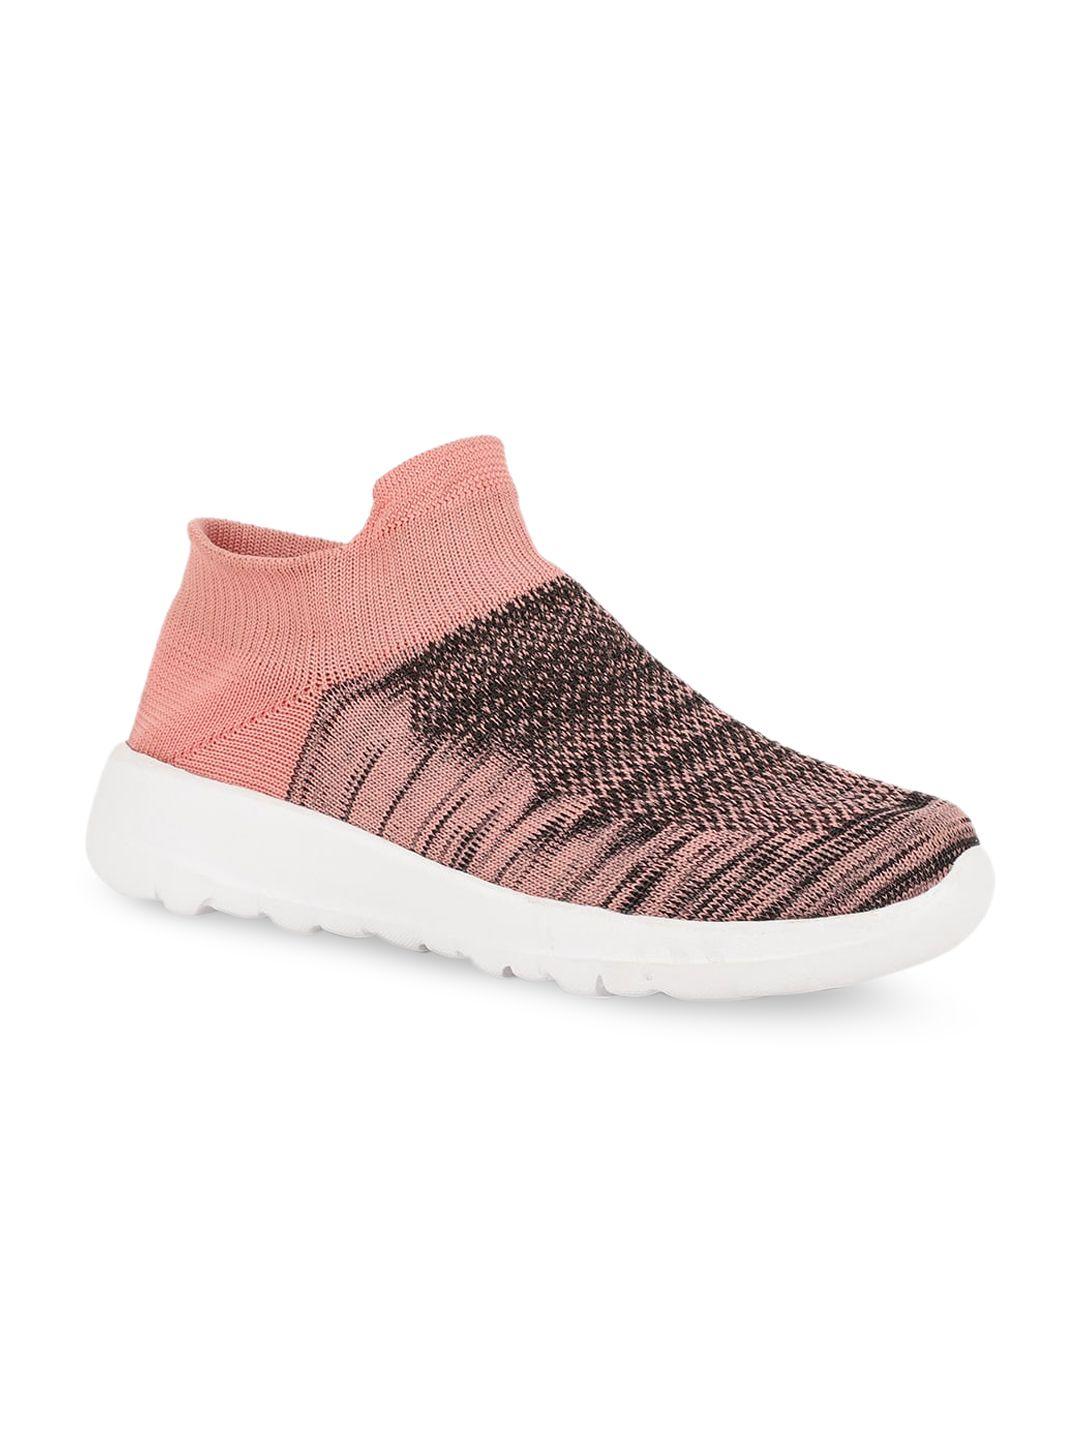 here&now women nude-coloured & black woven design slip-on sneakers